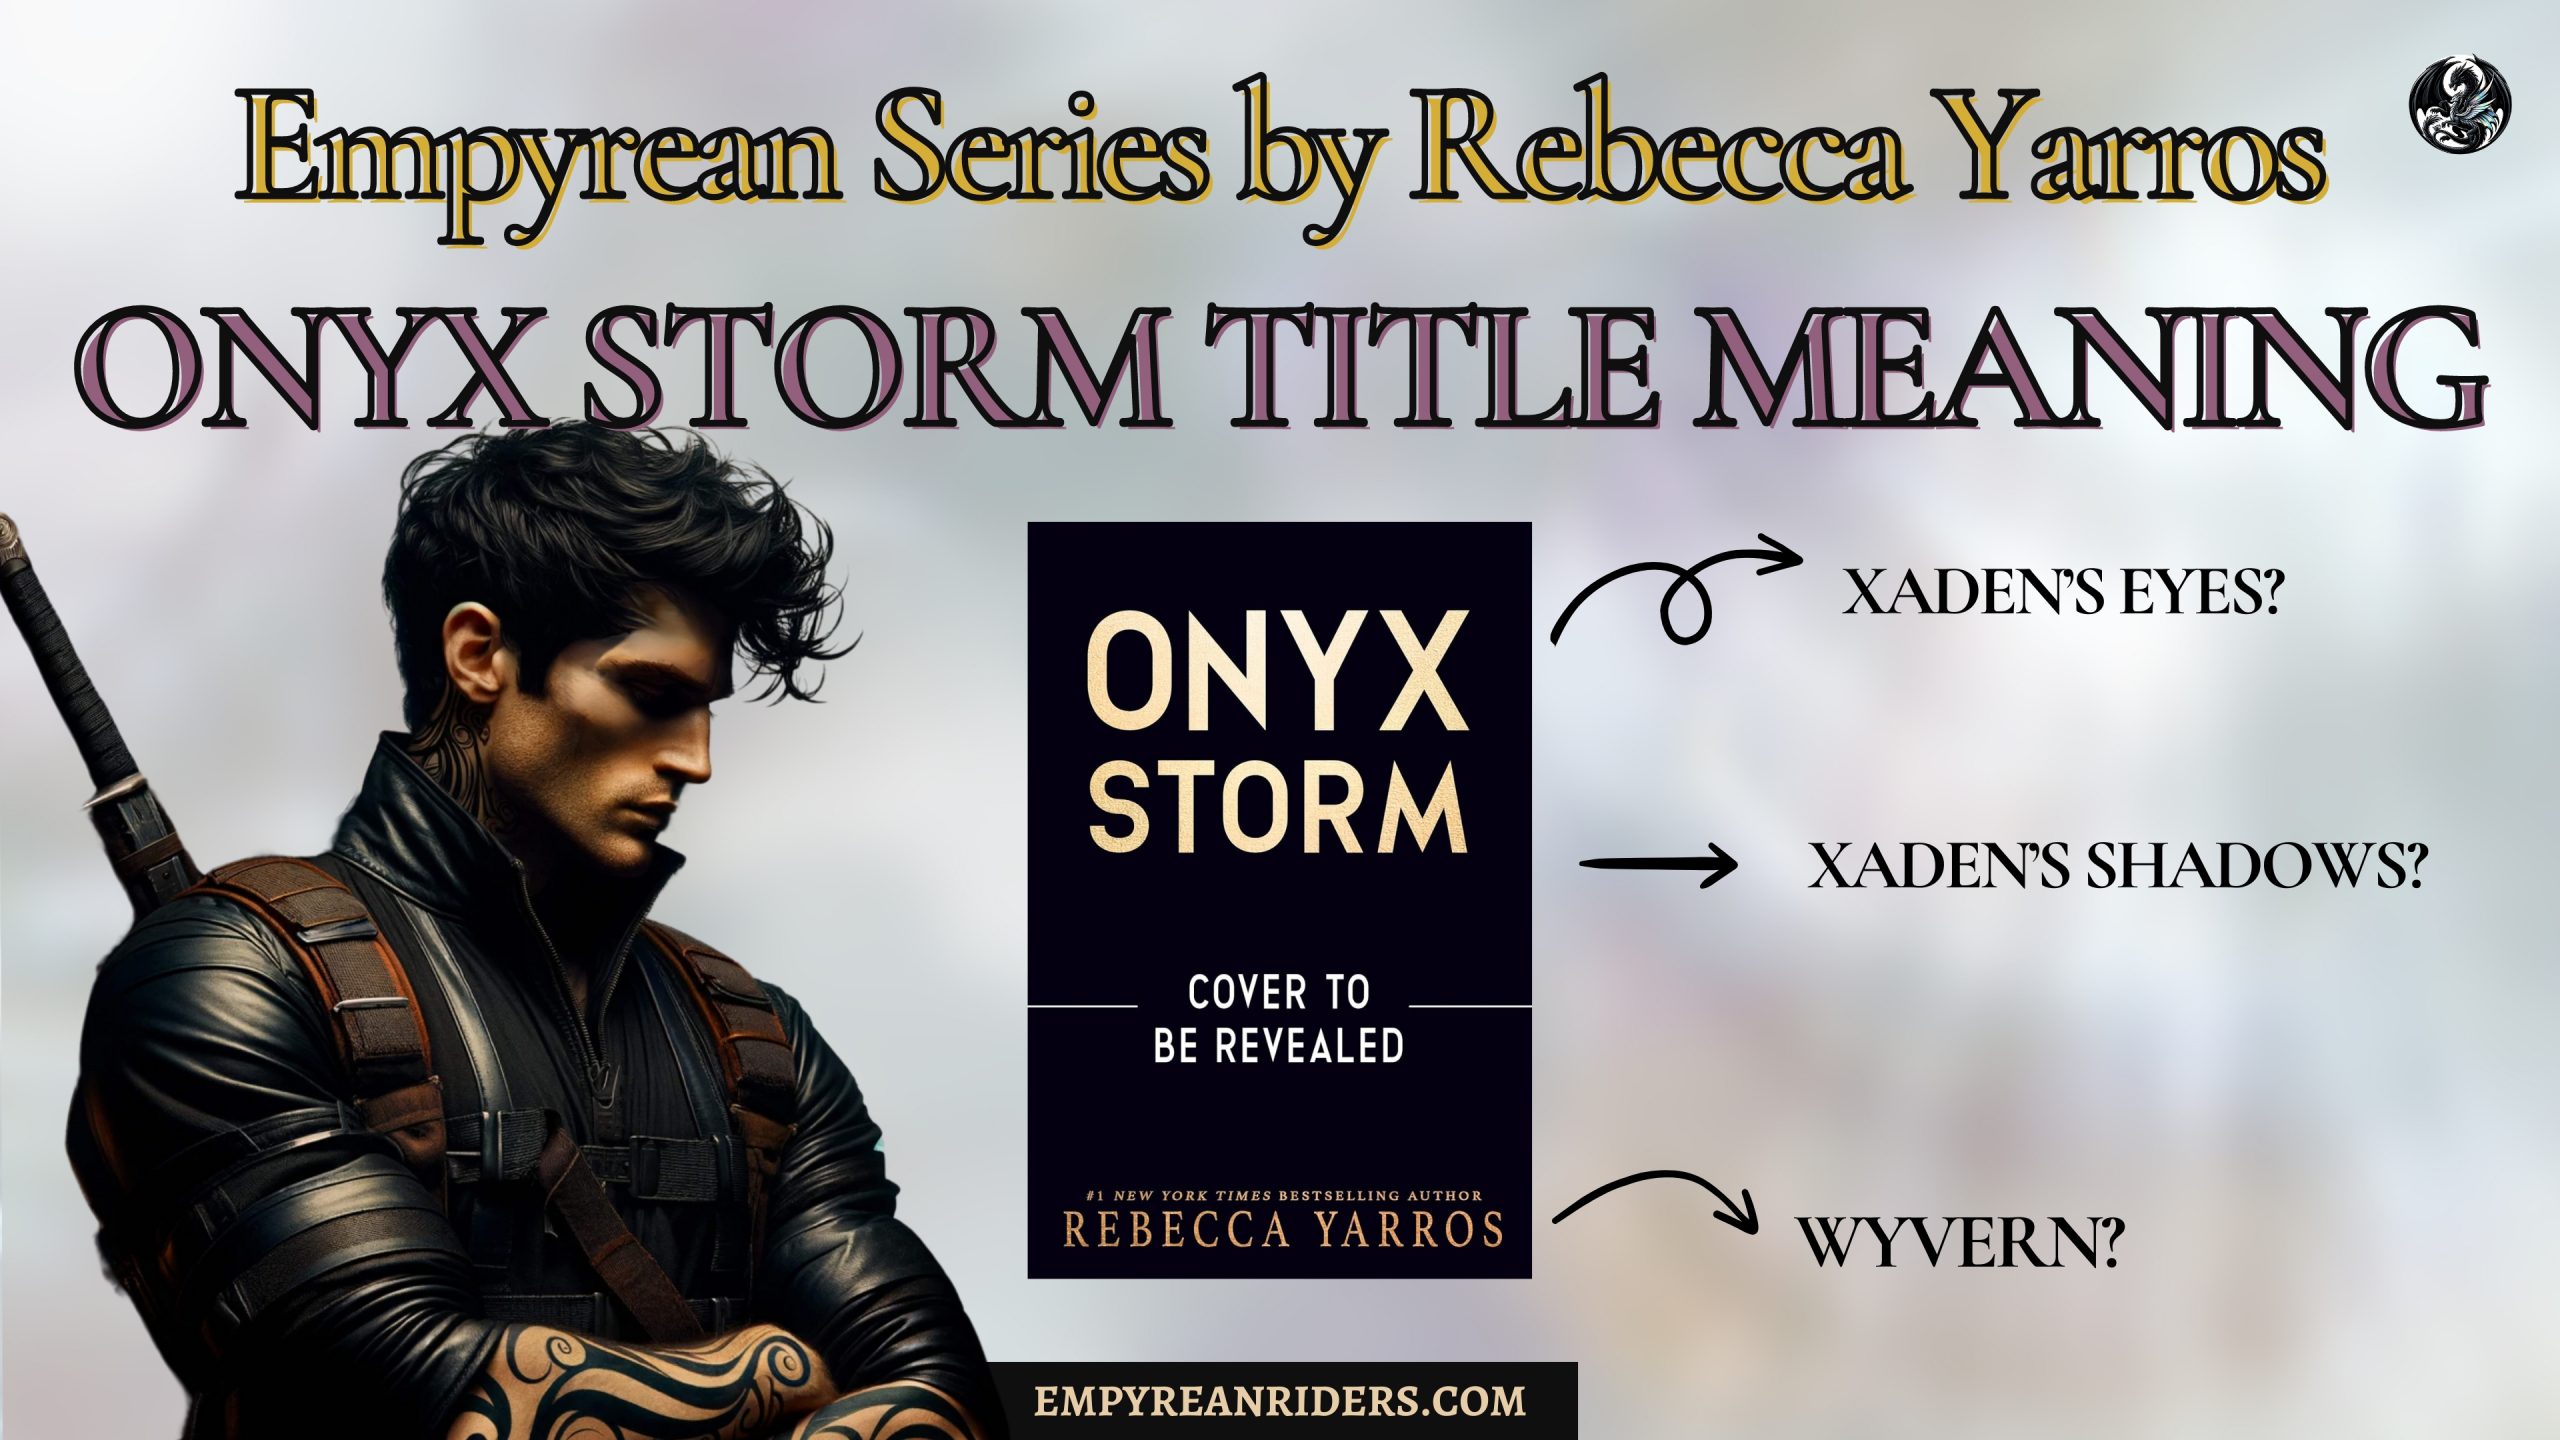 Onyx Storm title meaning Empyrean Series Book 3 Rebecca Yarros